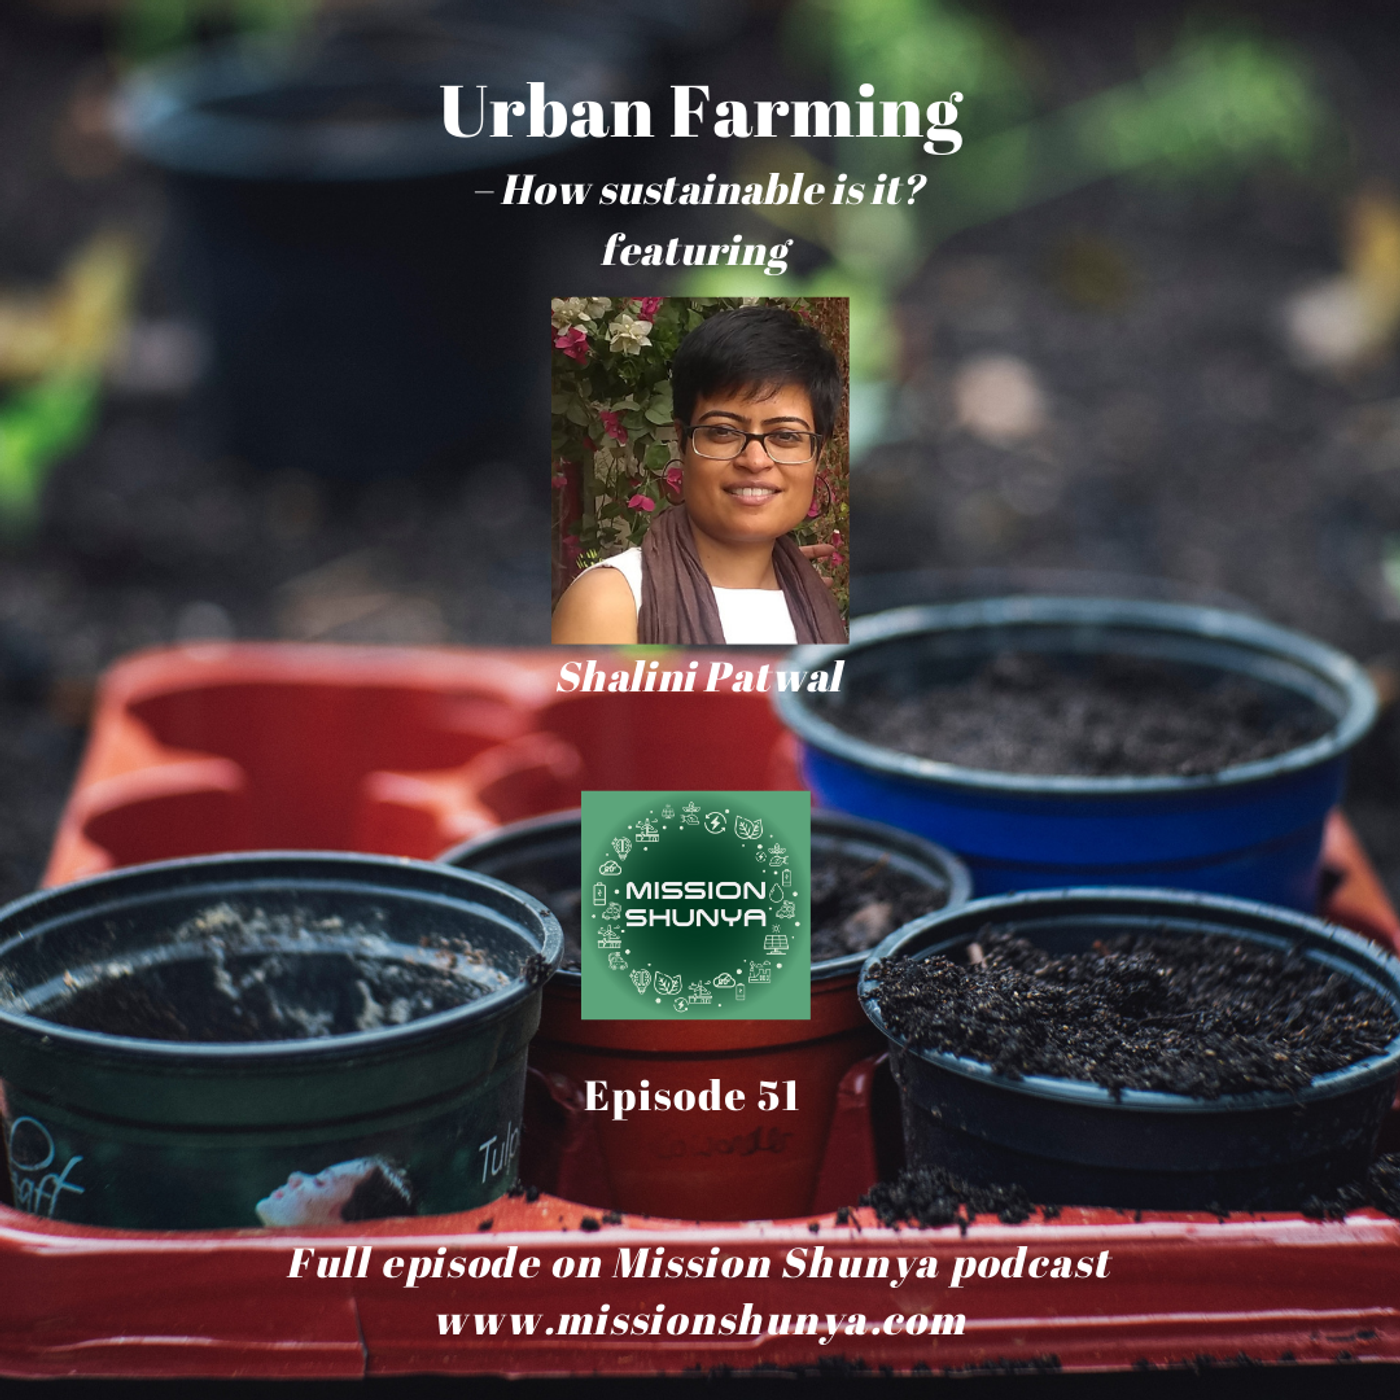 51: How sustainable is urban farming? ft. Shalini Patwal